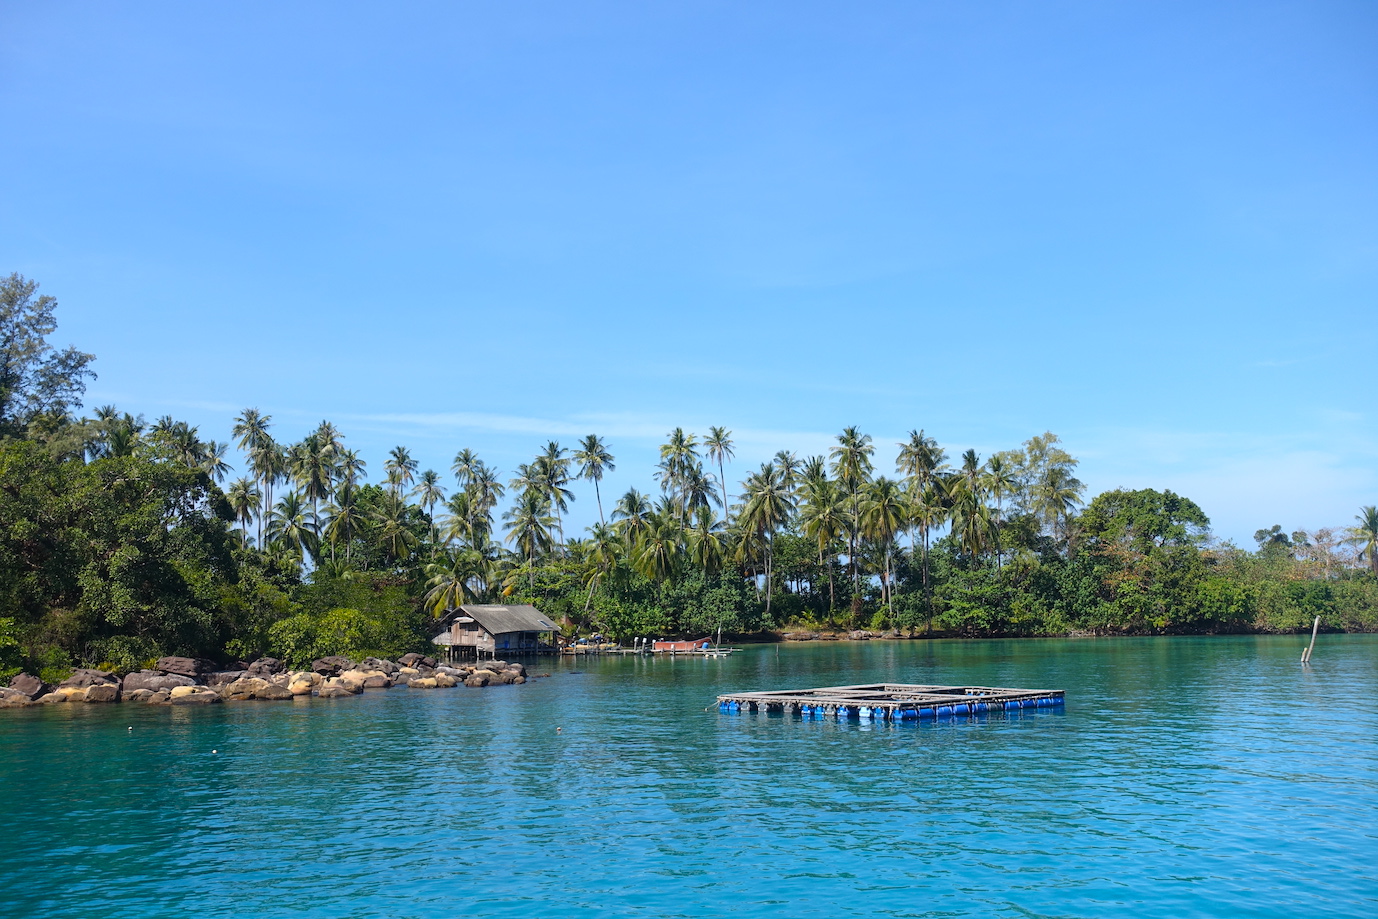 A beautiful view with a lot of palm trees and some rocks of the Koh Kood coast from the boat